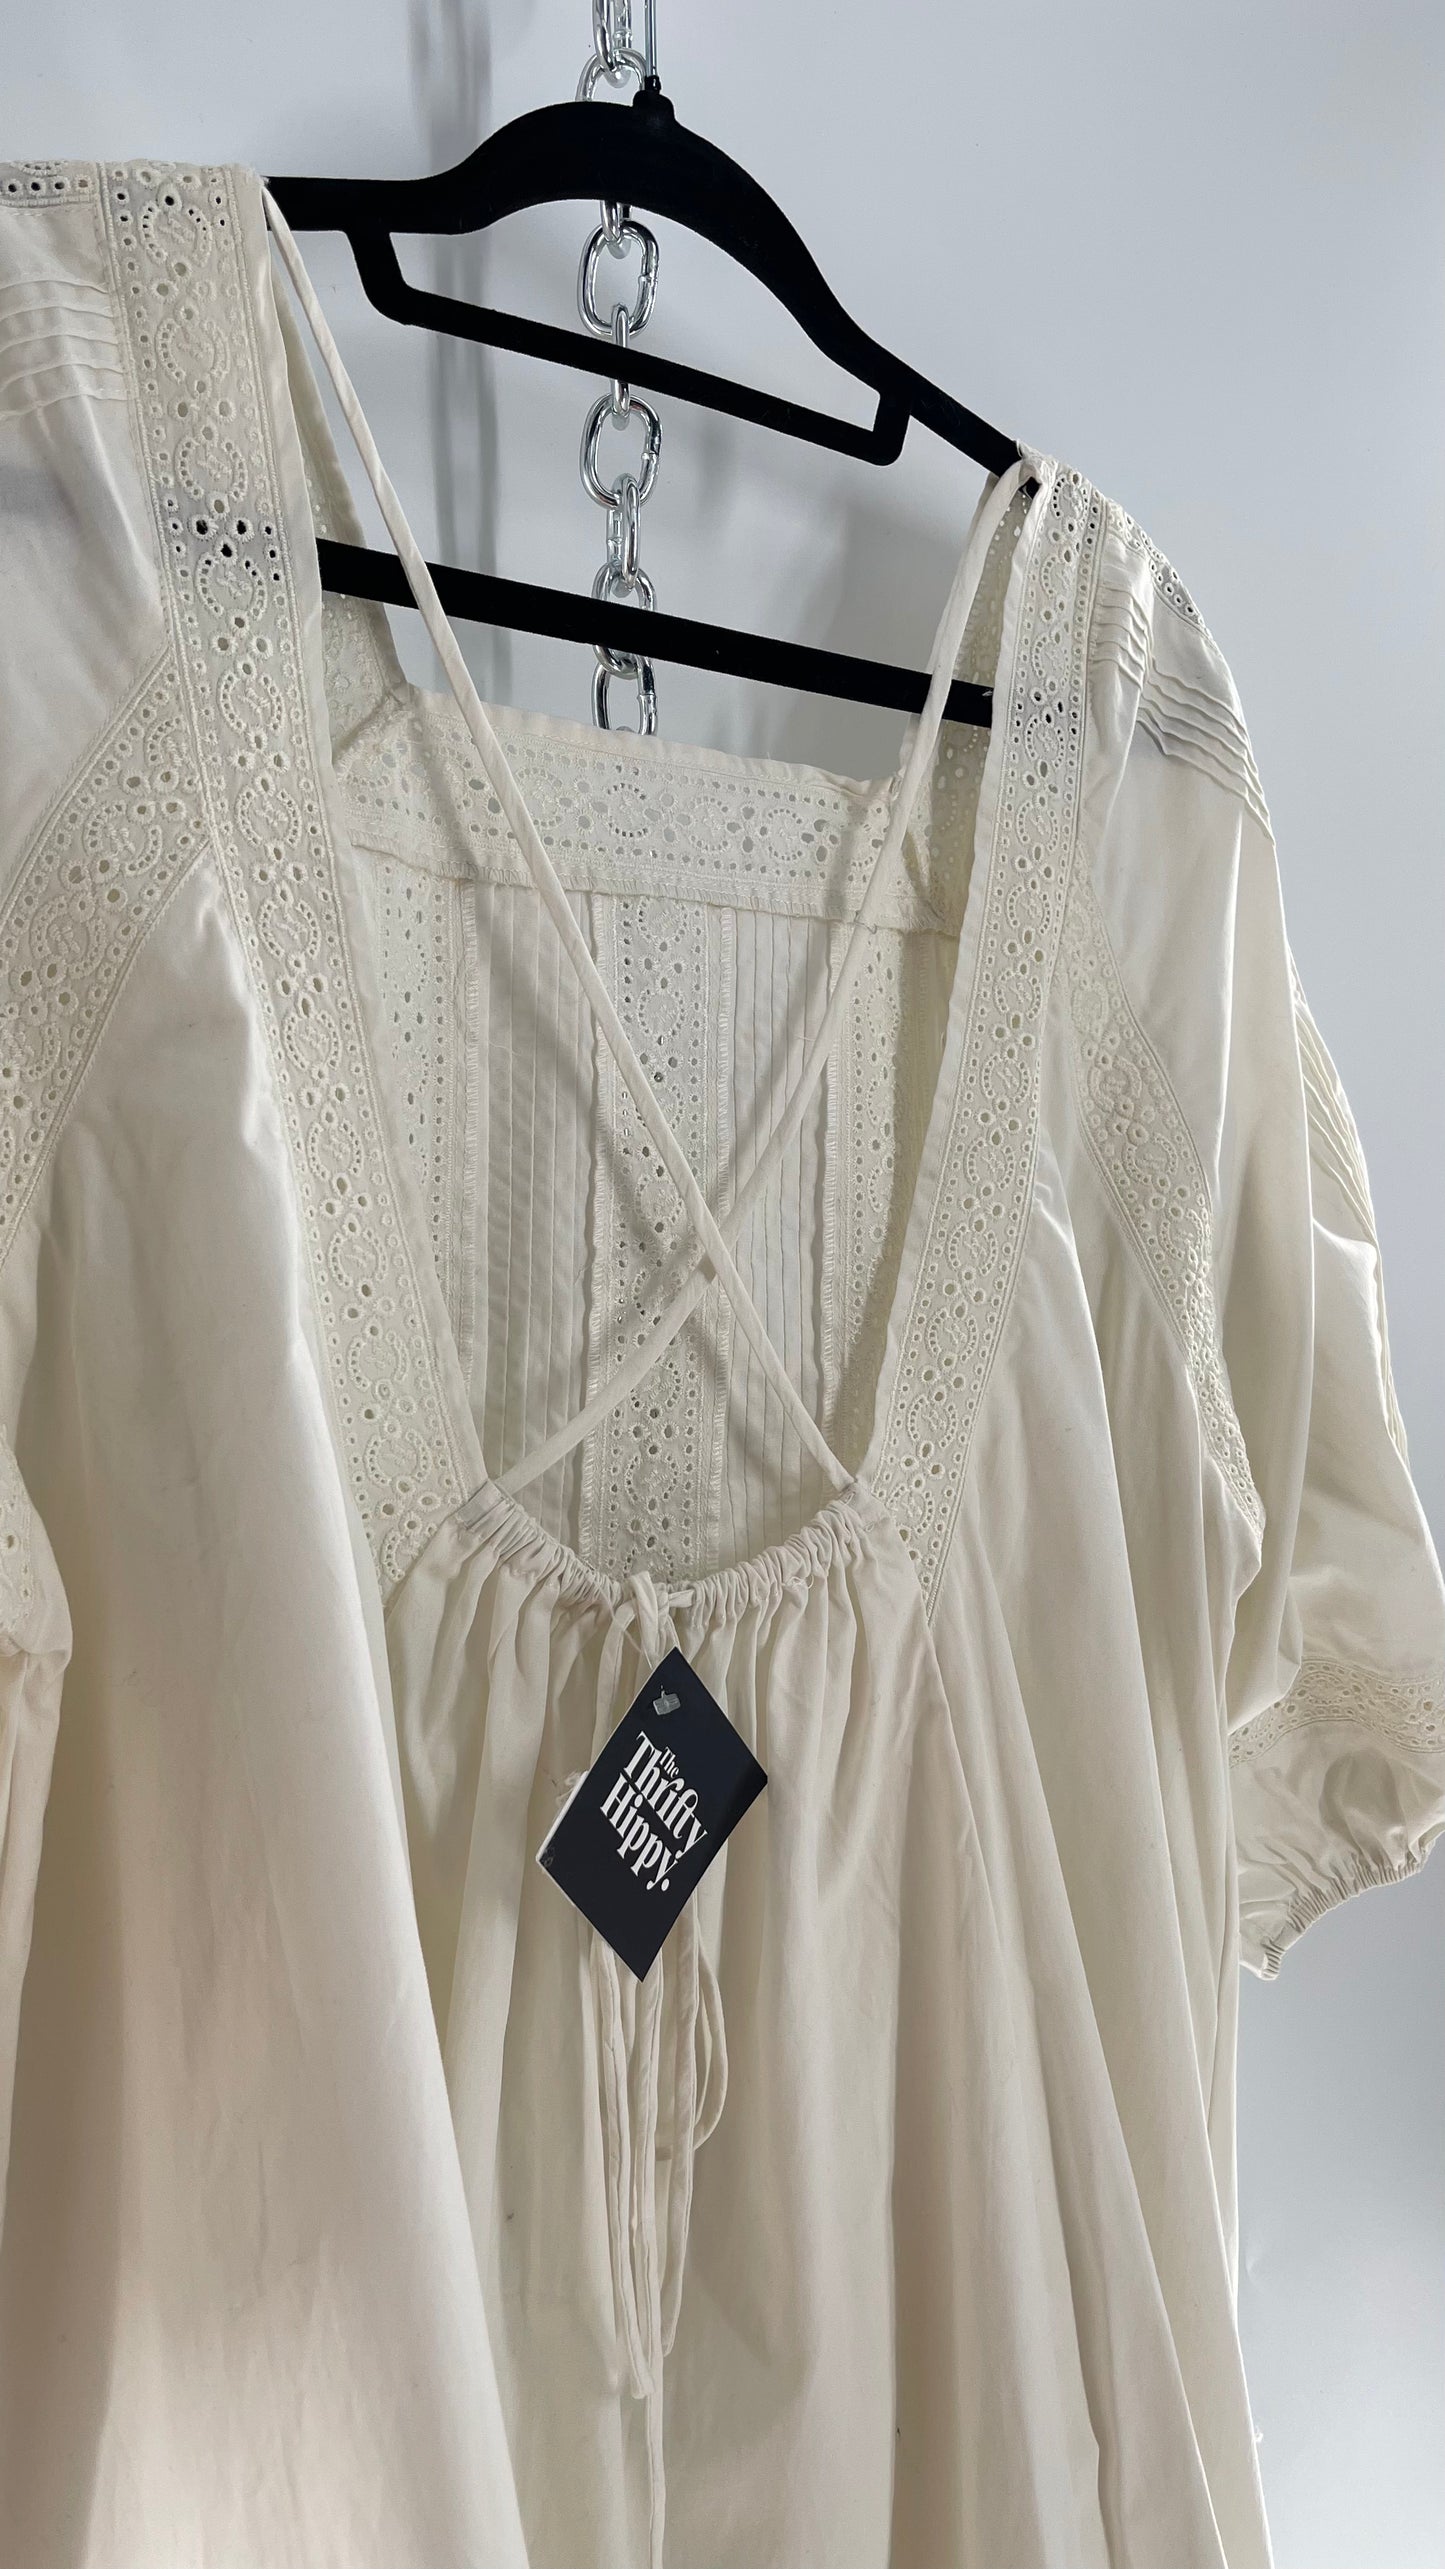 Free People White Long Sleeve Mini with Open Back and Lace Detailing (Small)